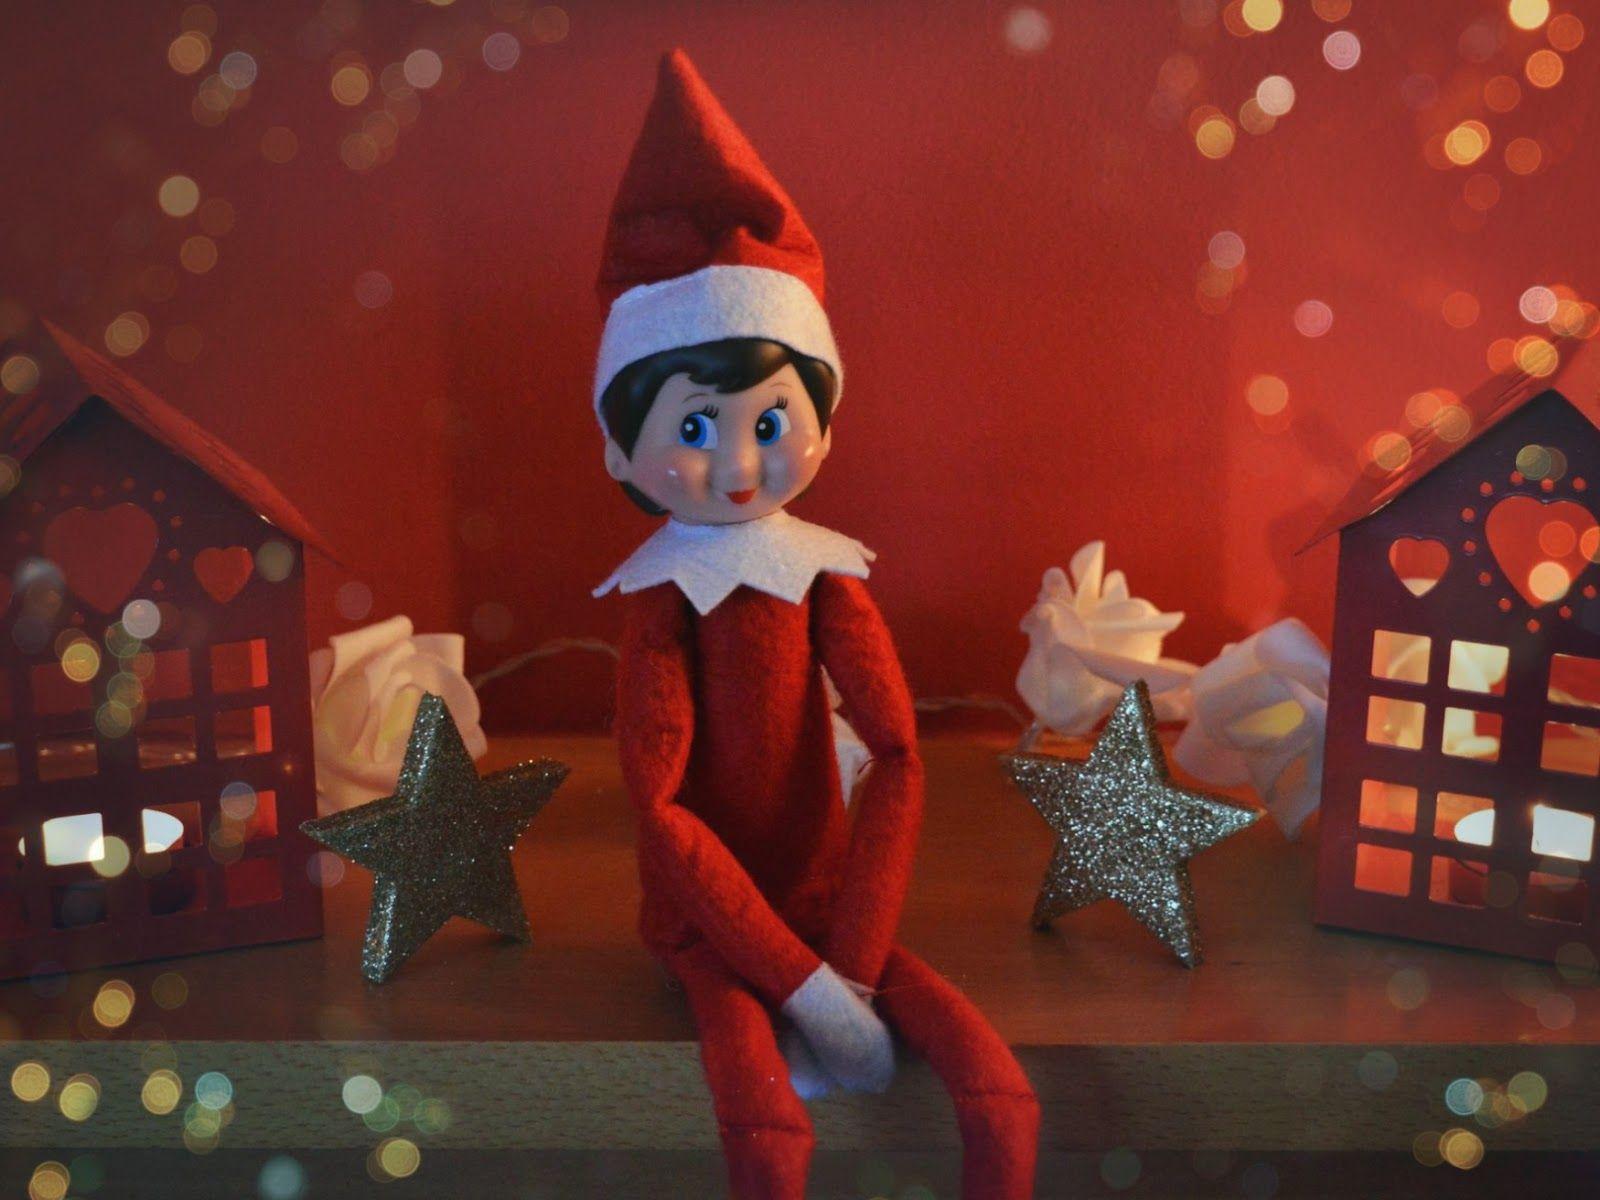 Our New Christmas Tradition. The Elf On The Shelf ® ♥